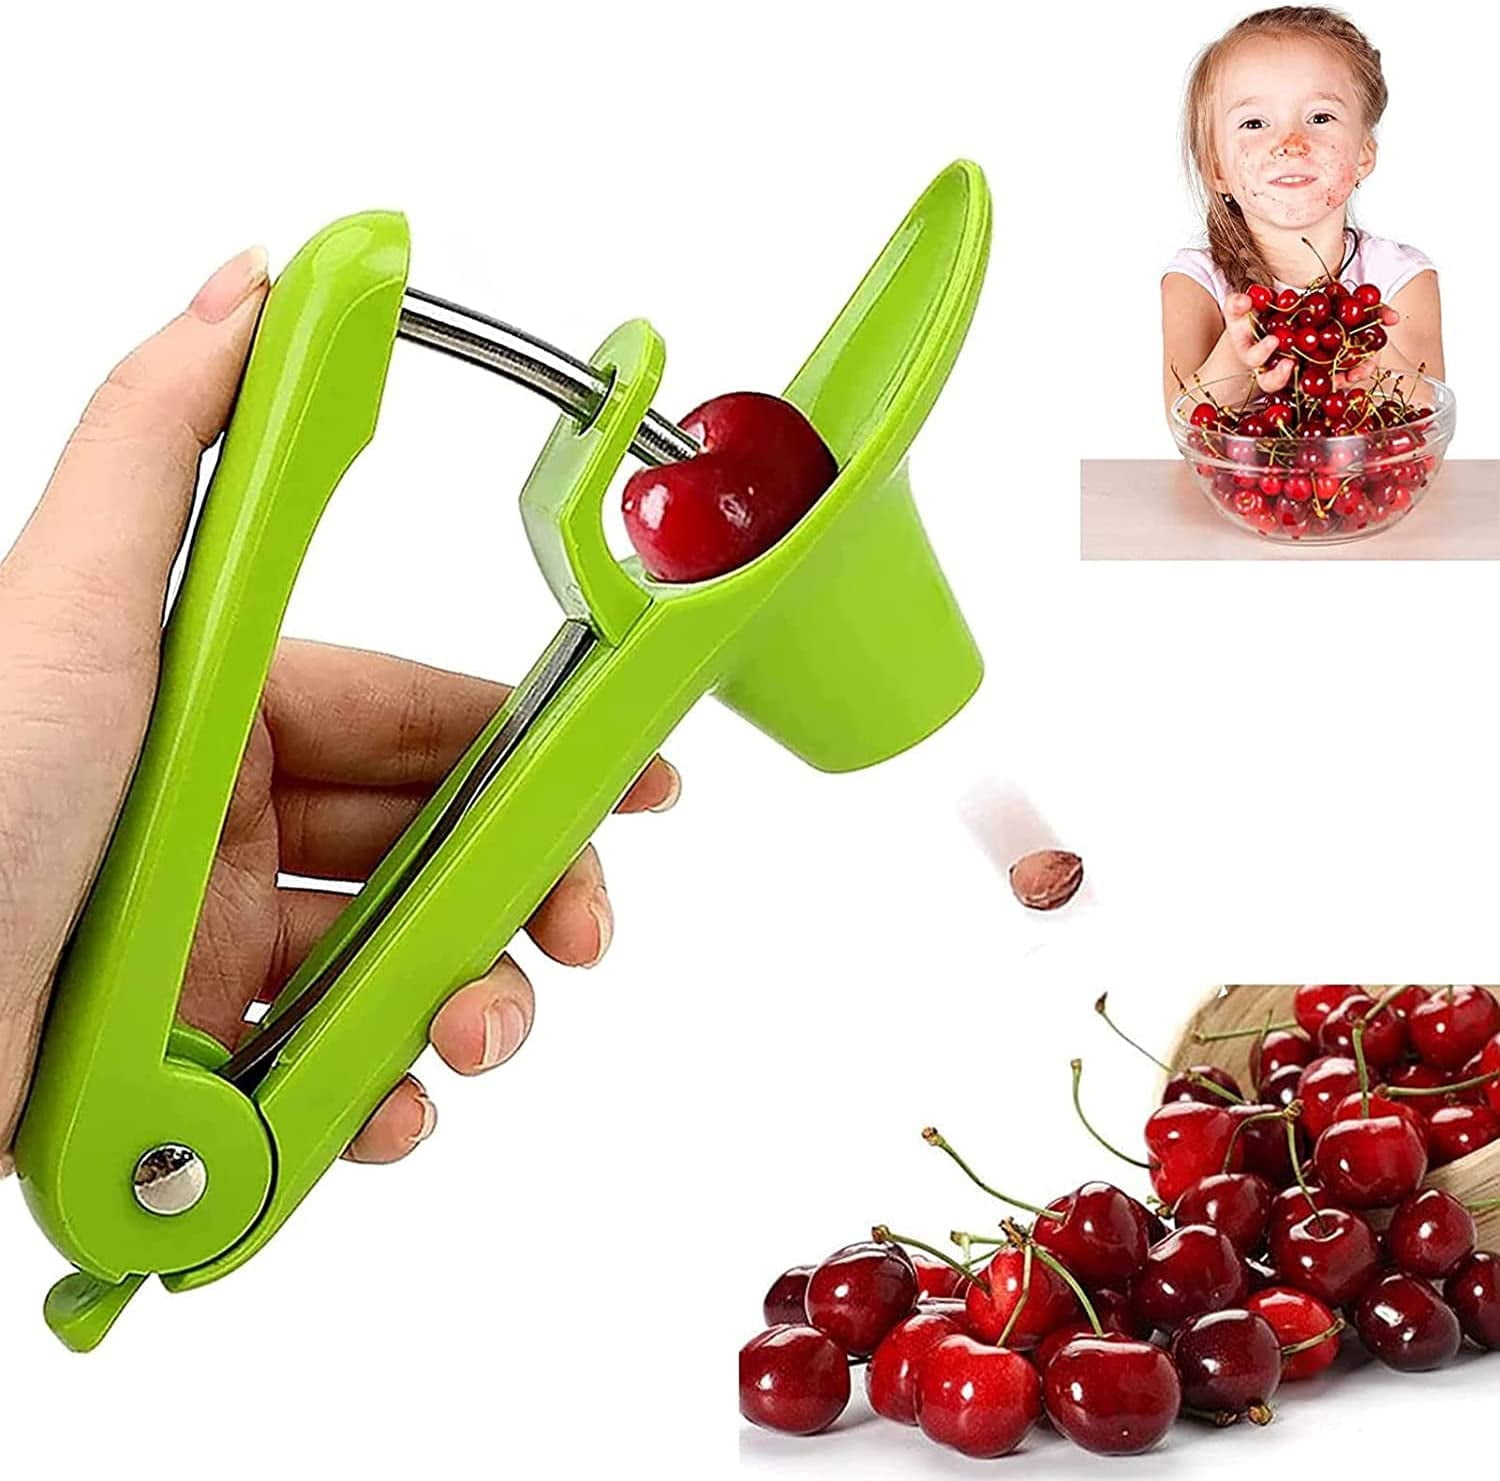 Stainless Steel Fruit Pit Corer with Space-Saving Lock Design for Make Fresh Cherry Dishes and Cocktail Cherries Heavy Duty Olive Pitter Remover Cherry Pitter Tool 